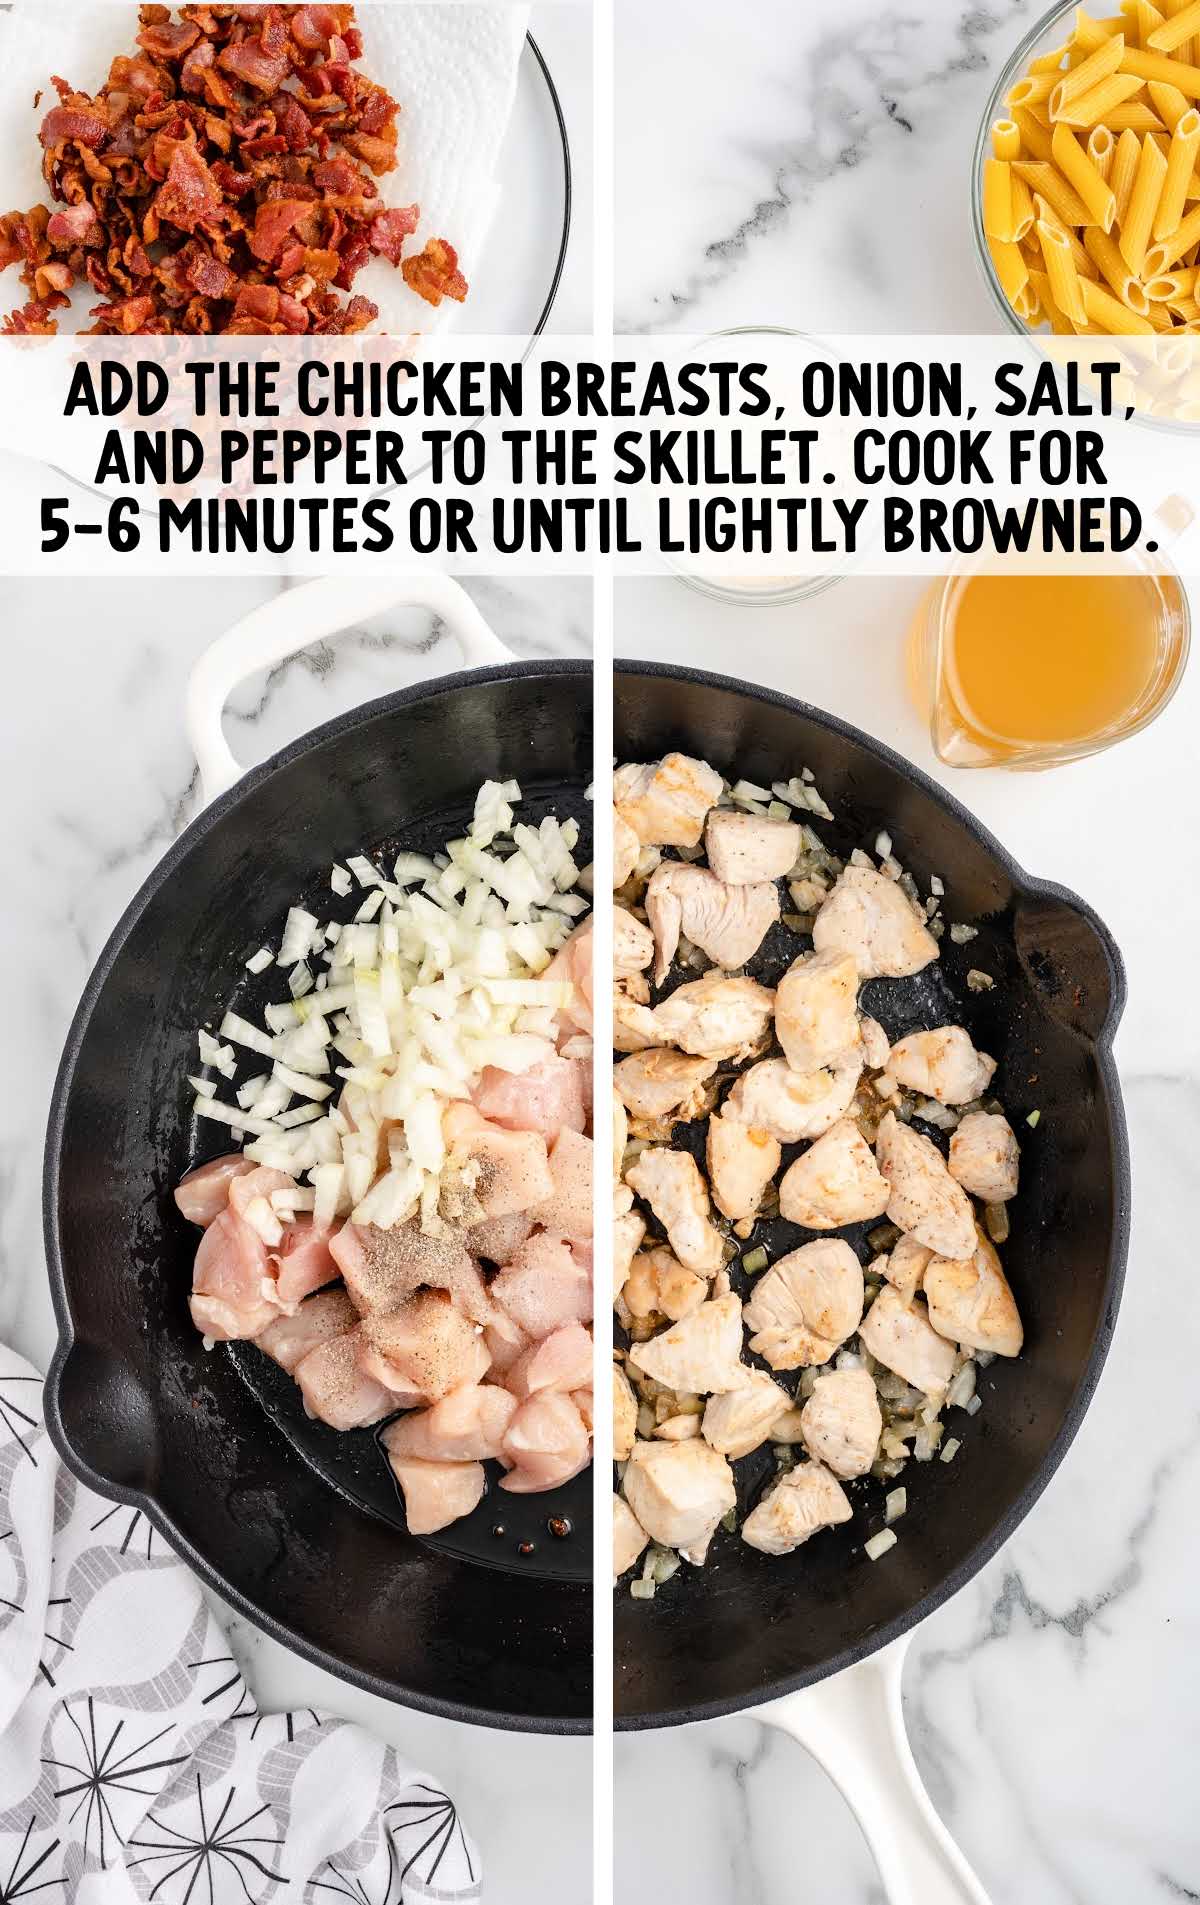 boneless skinless chicken breasts, diced yellow onion, salt, and black pepper added to the skillet